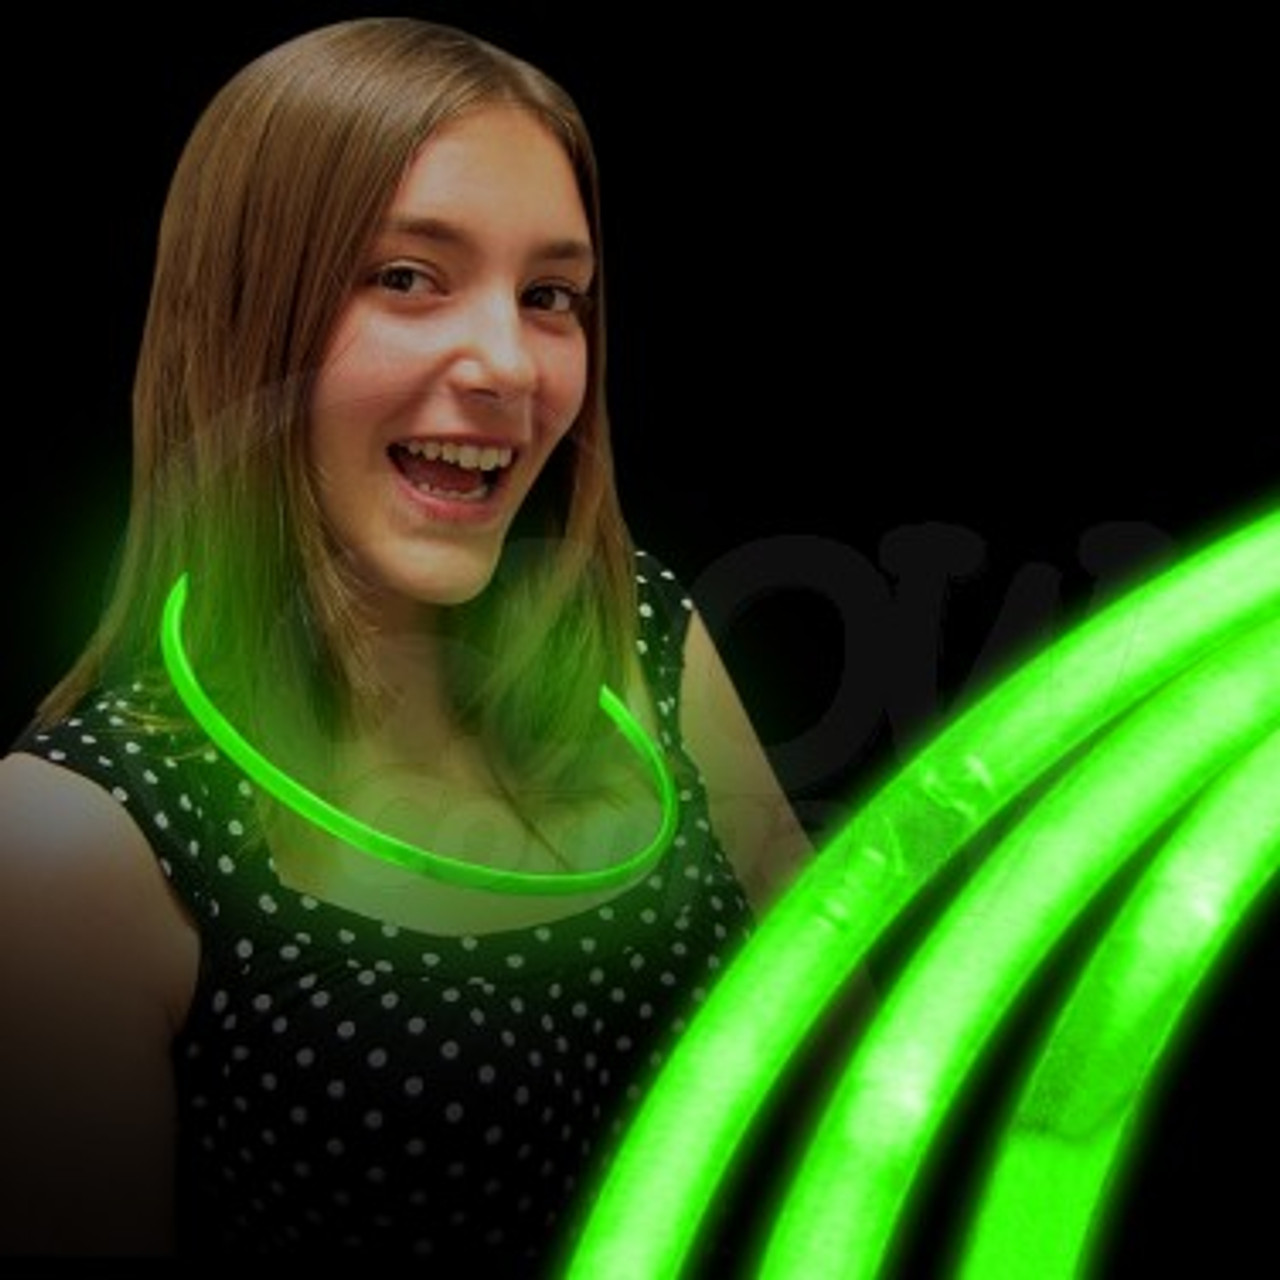 GLOW IN A DARK NECKLACES FOR ALL NIGHT EVENTS.